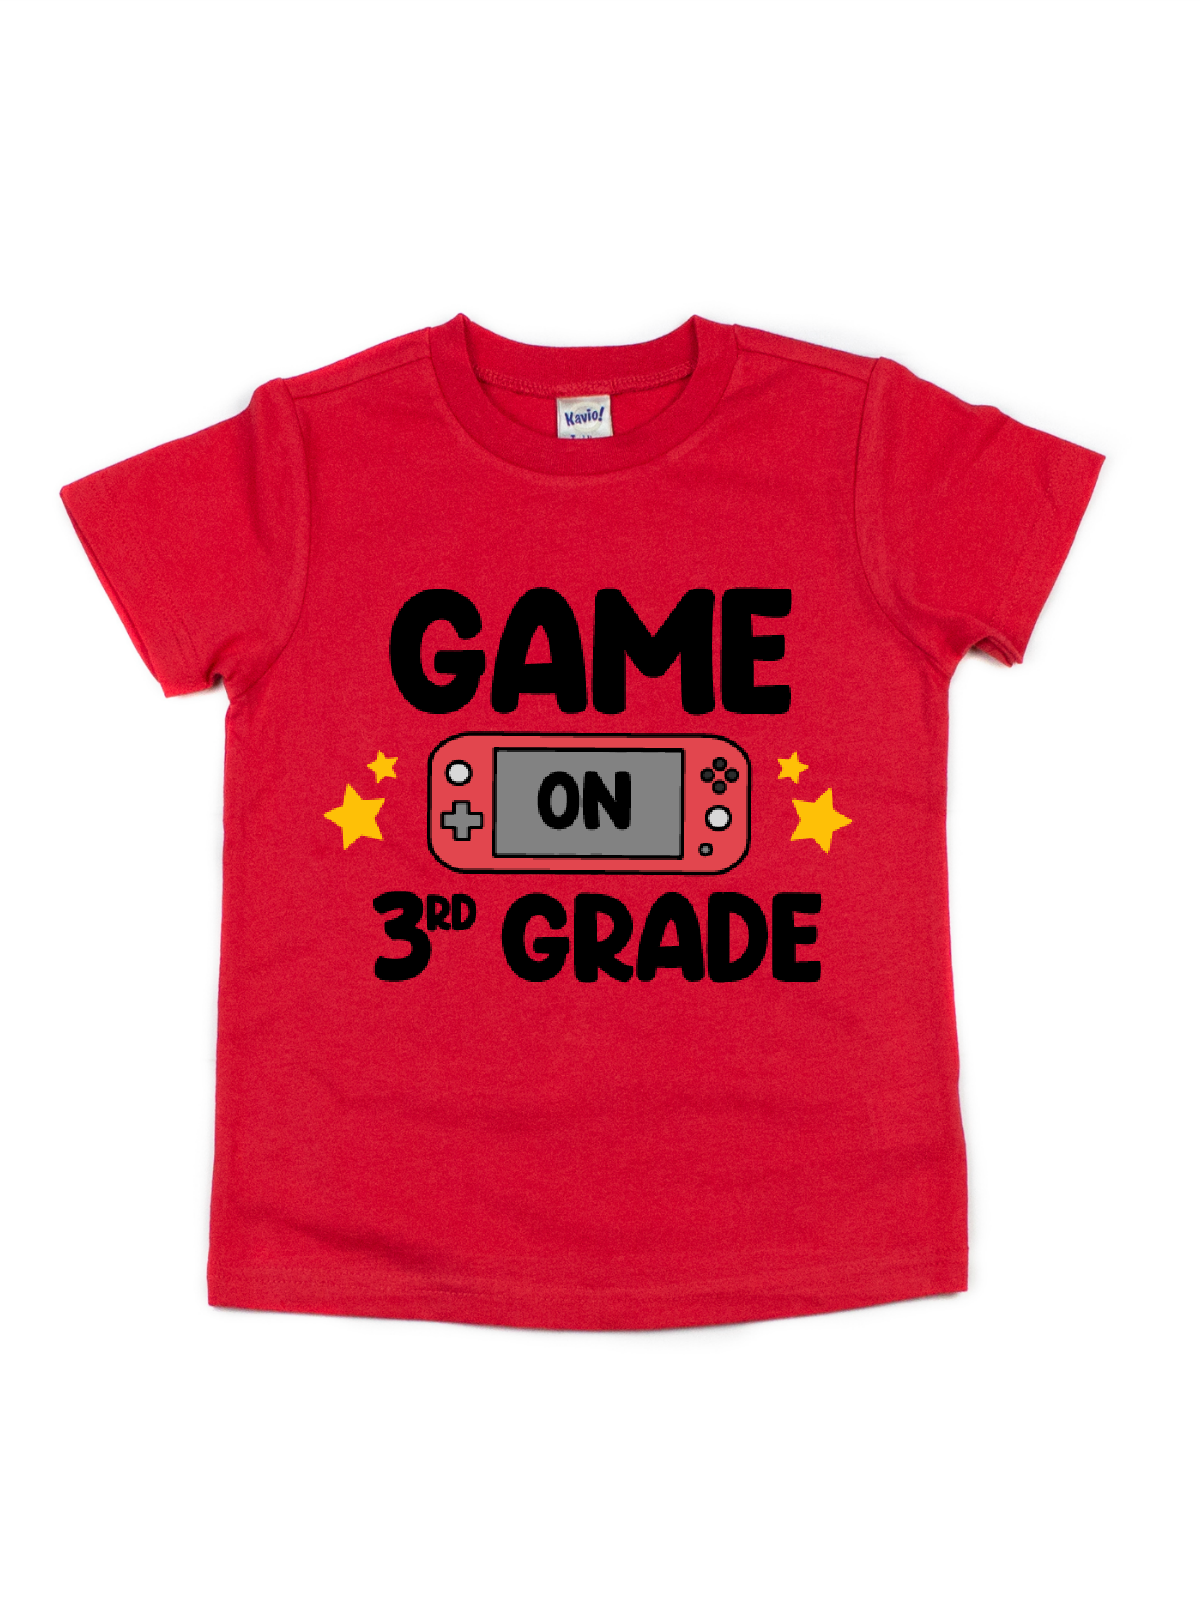 game on 3rd grade kids back to school shirt